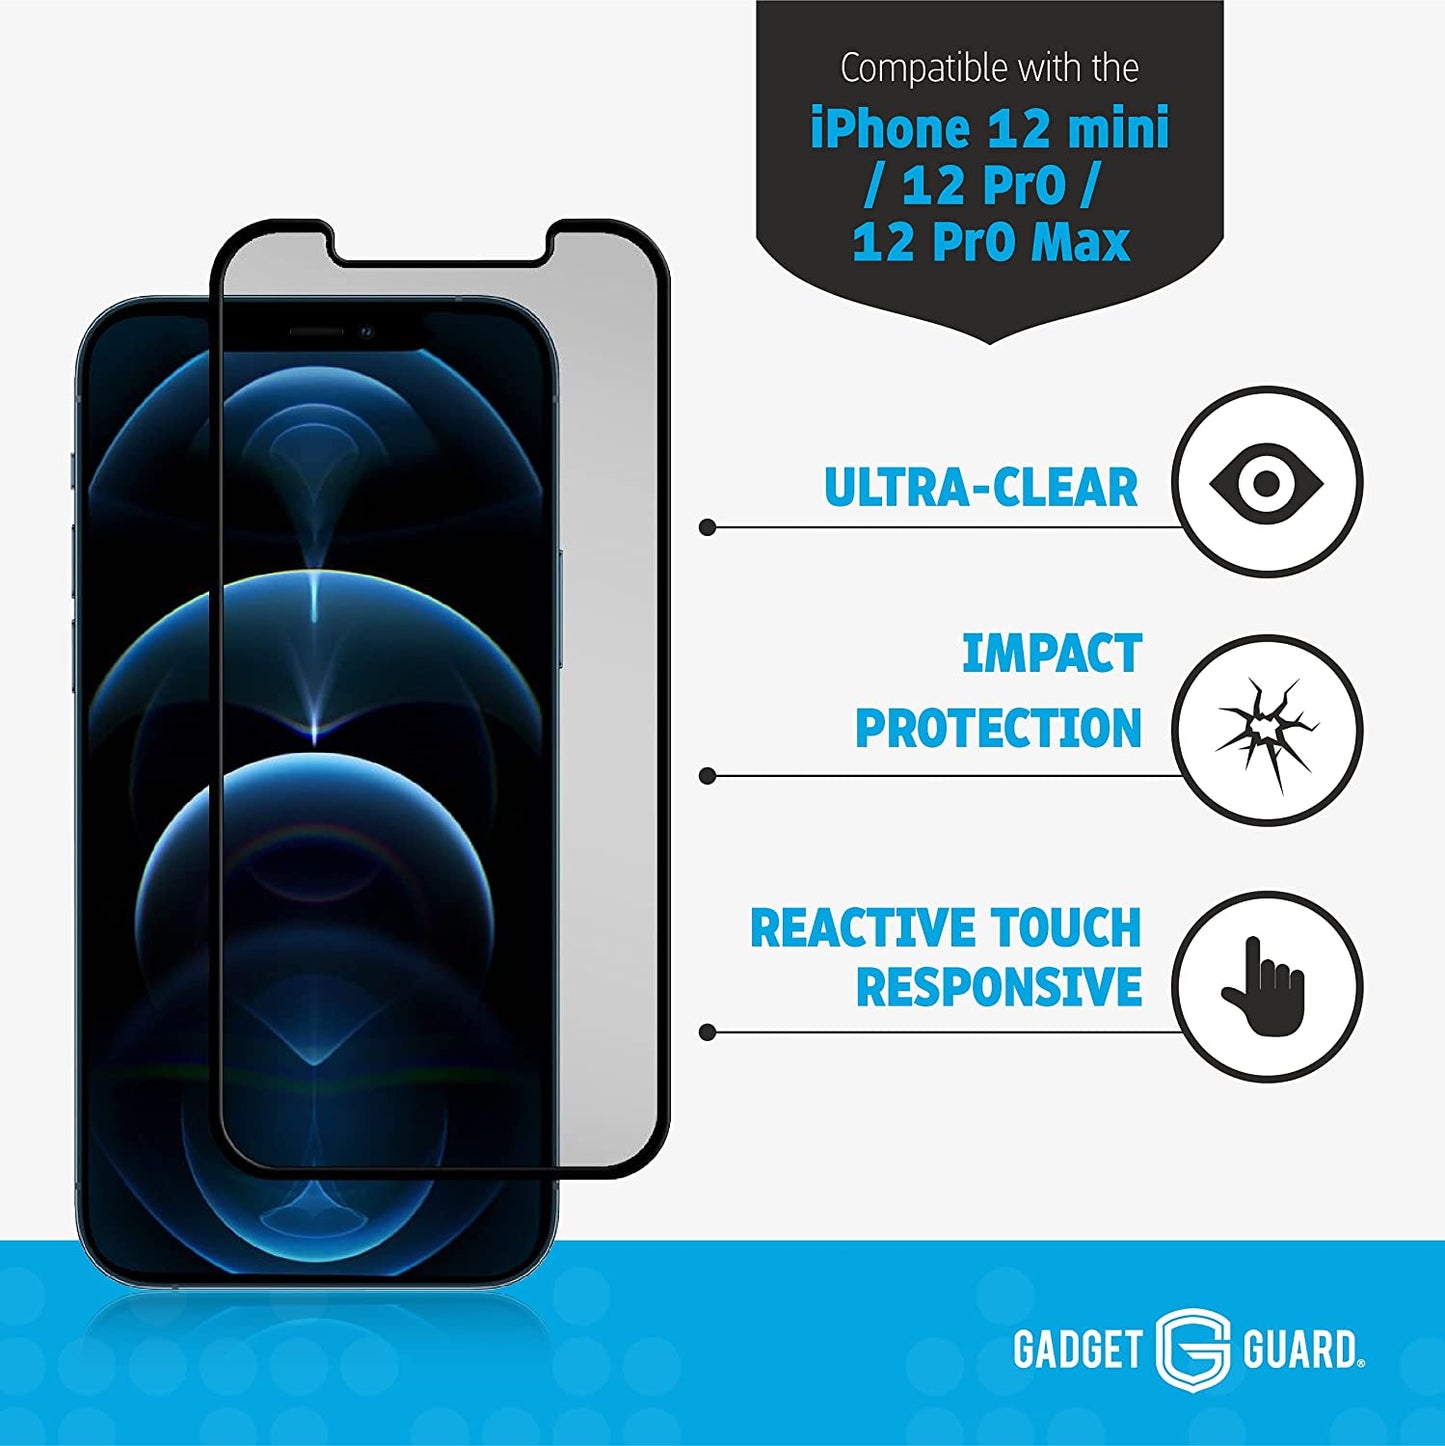 Tempered Glass Screen Protector with Guardplus $150 Insurance, Fits Iphone 12 Pro Max, Best Impact and Scratch Protection, Easy Installation